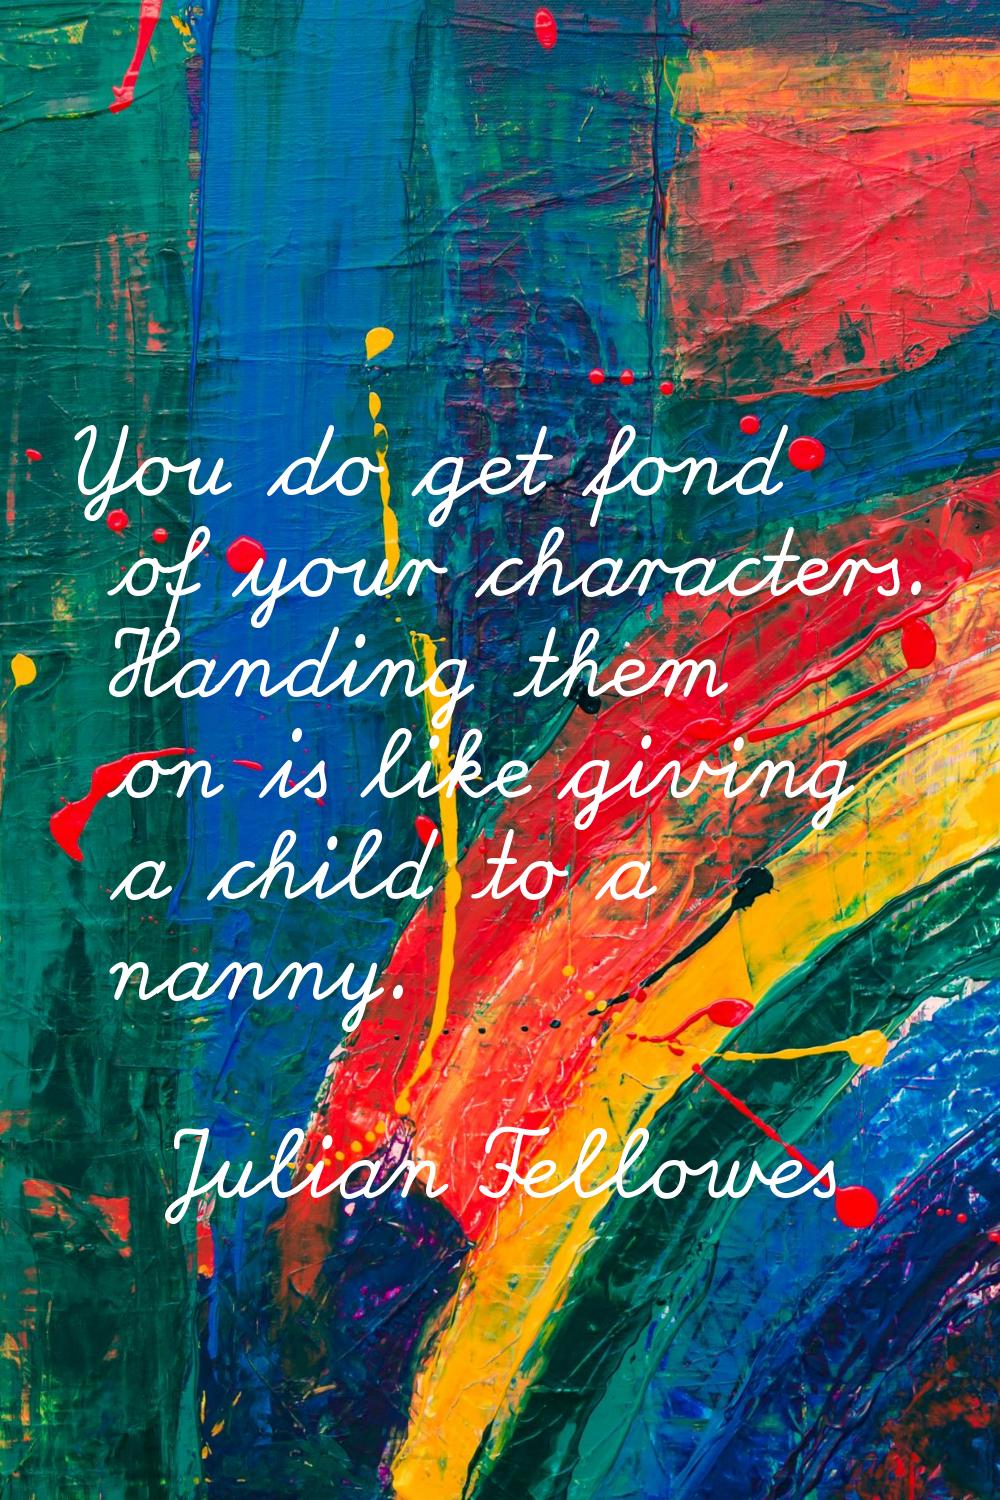 You do get fond of your characters. Handing them on is like giving a child to a nanny.